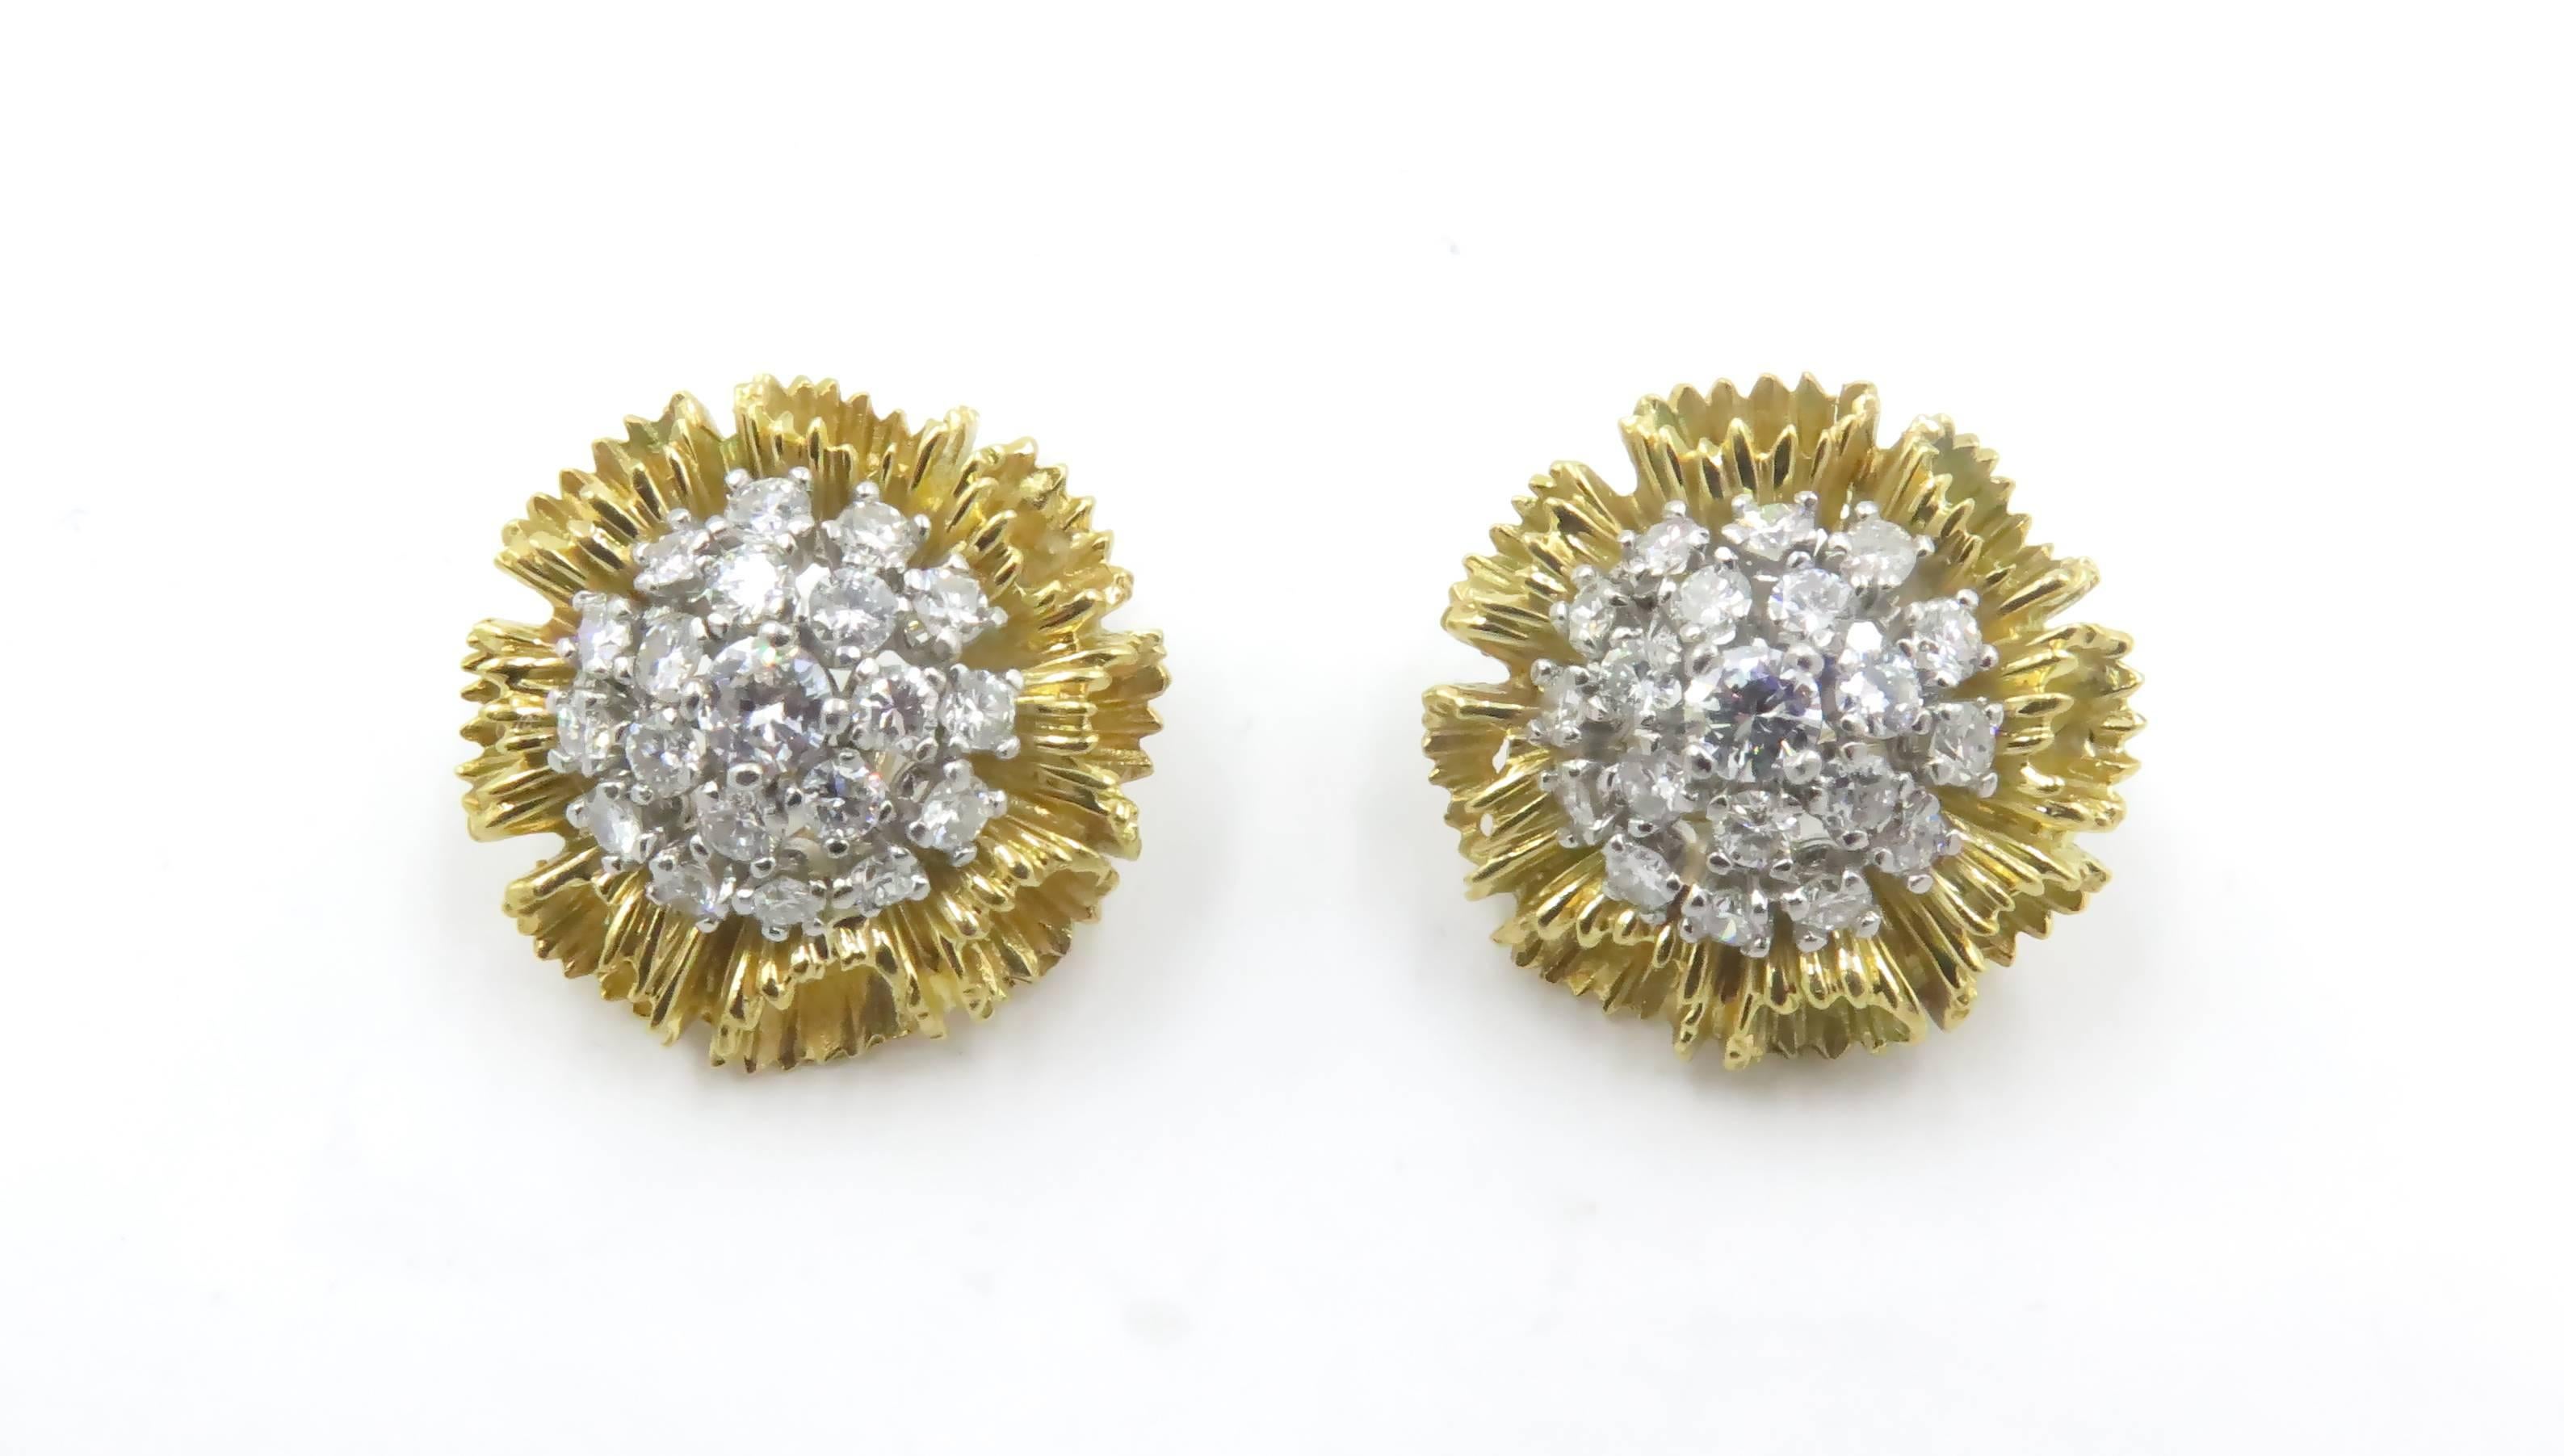 A pair of 18 karat yellow gold and diamond earrings.  Circa 1960s.   Designed as a flowered, centering a circular-cut diamond cluster, extending textured gold petals. Forty (40) diamonds weigh approximately 2.40 carats.Gross weight approximately